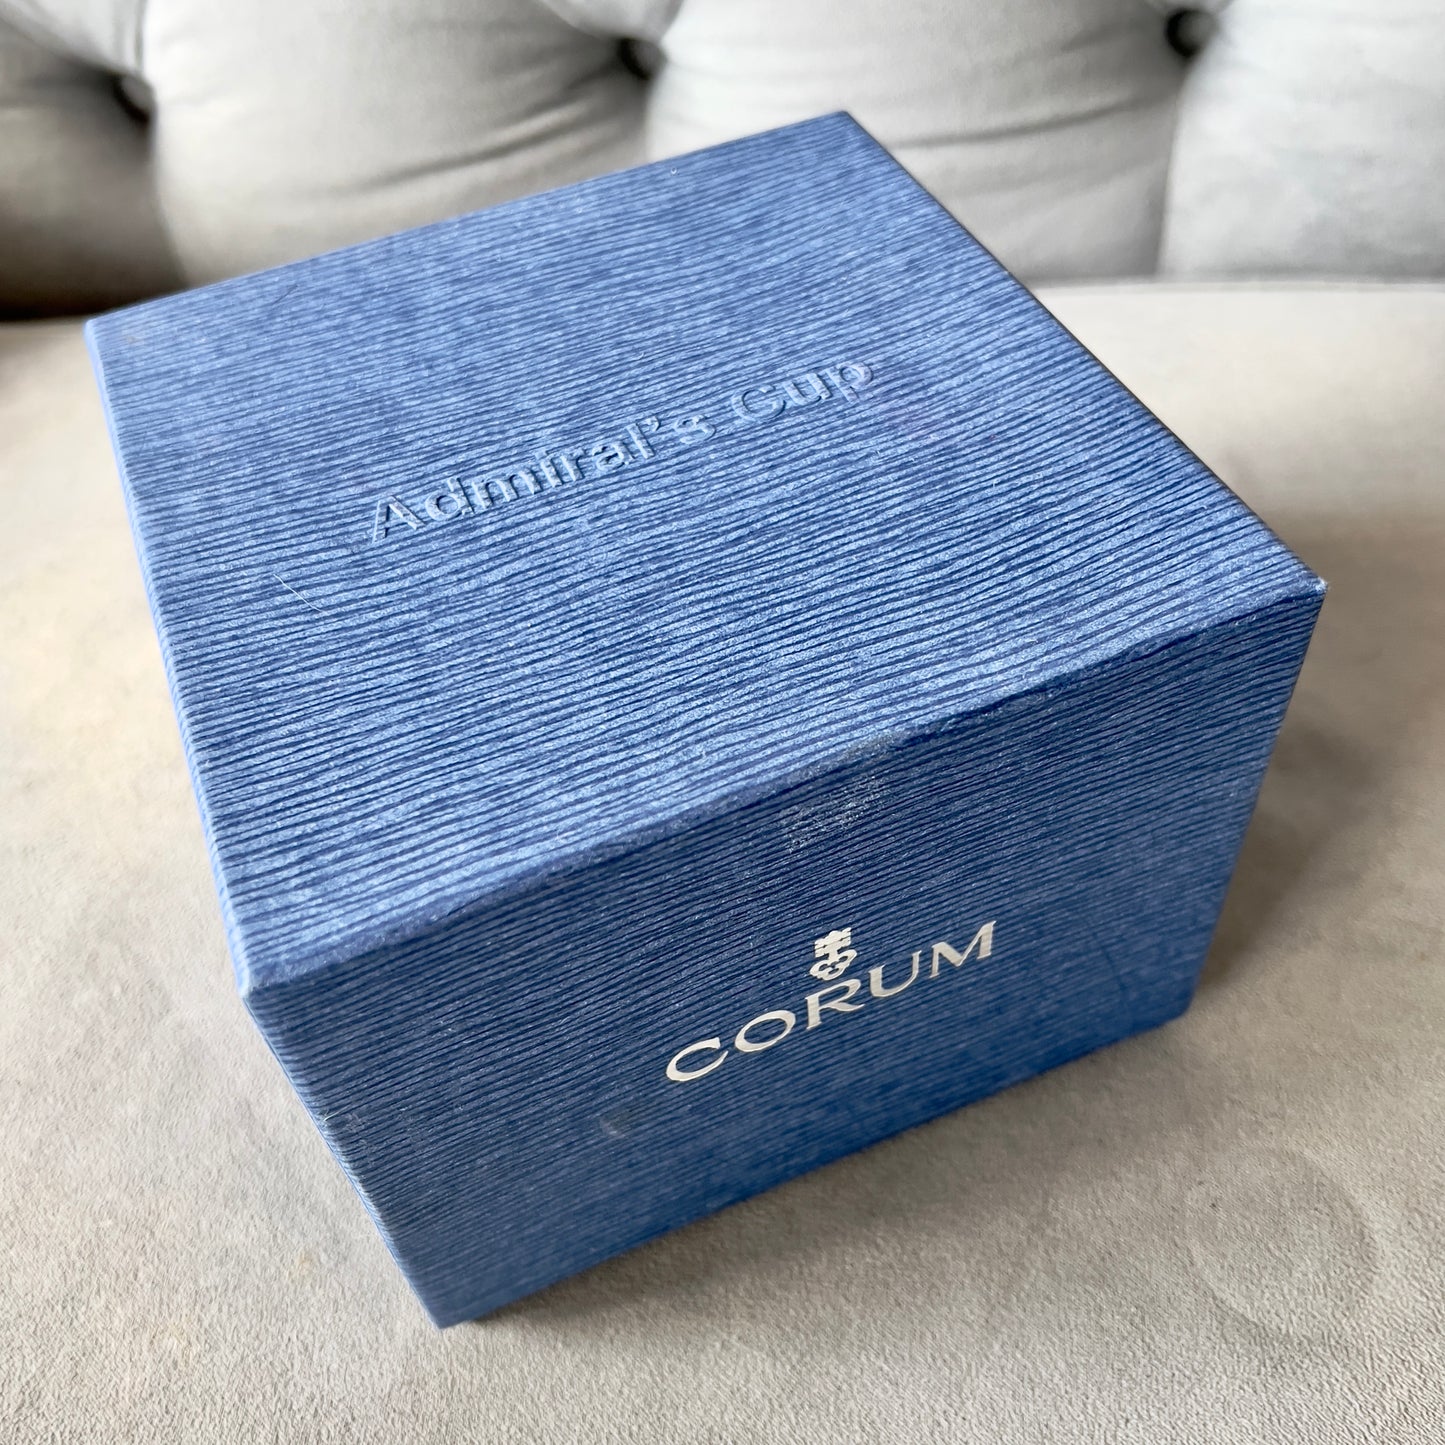 CORUM ADMIRAL’S CUP Box + Outer Box